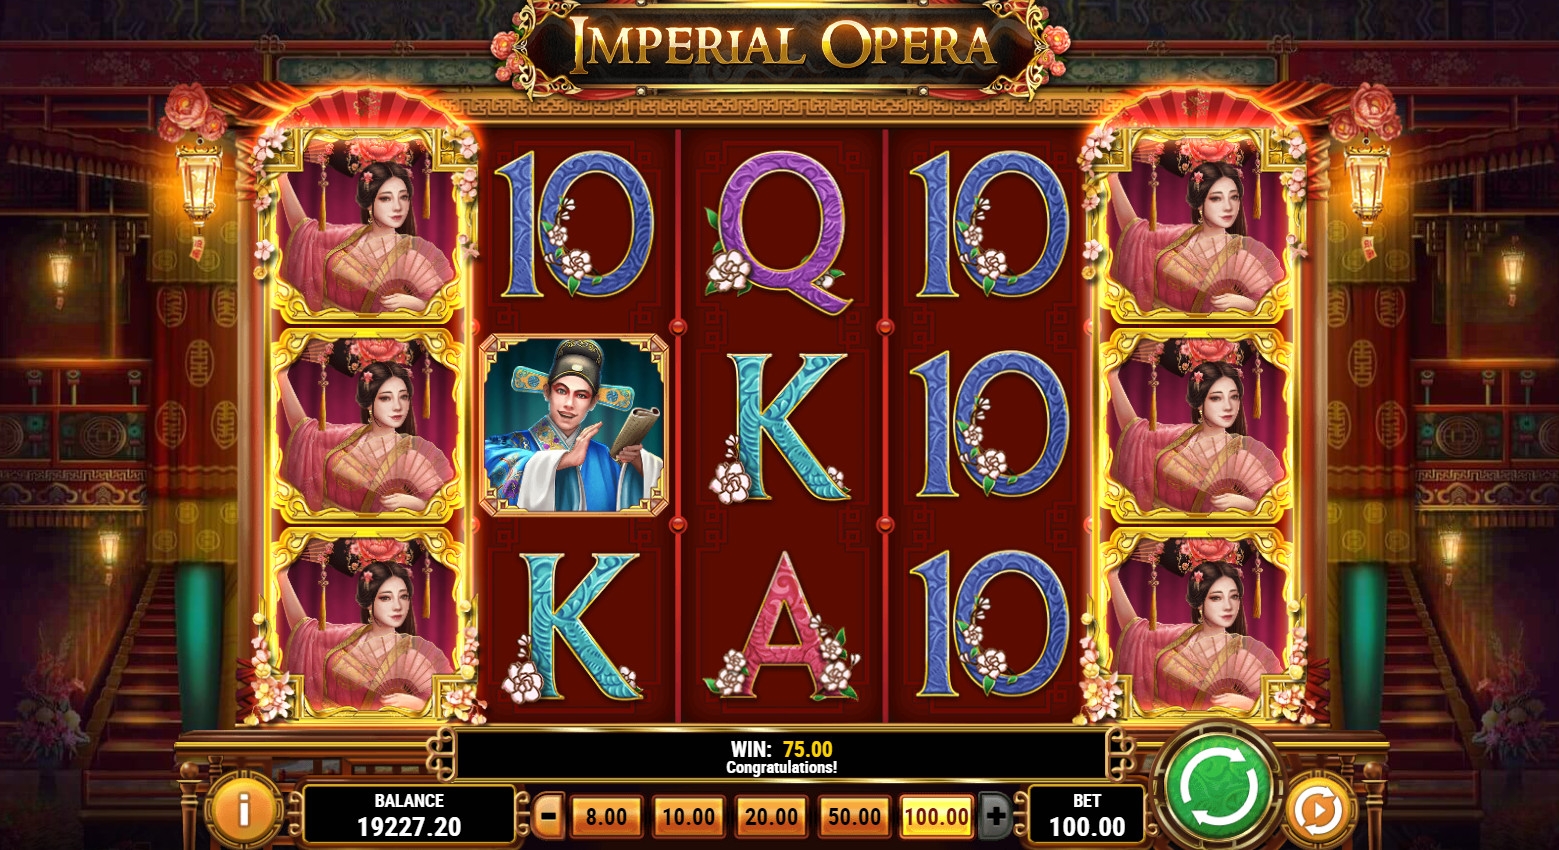 Imperial Opera (Imperial Opera) from category Slots